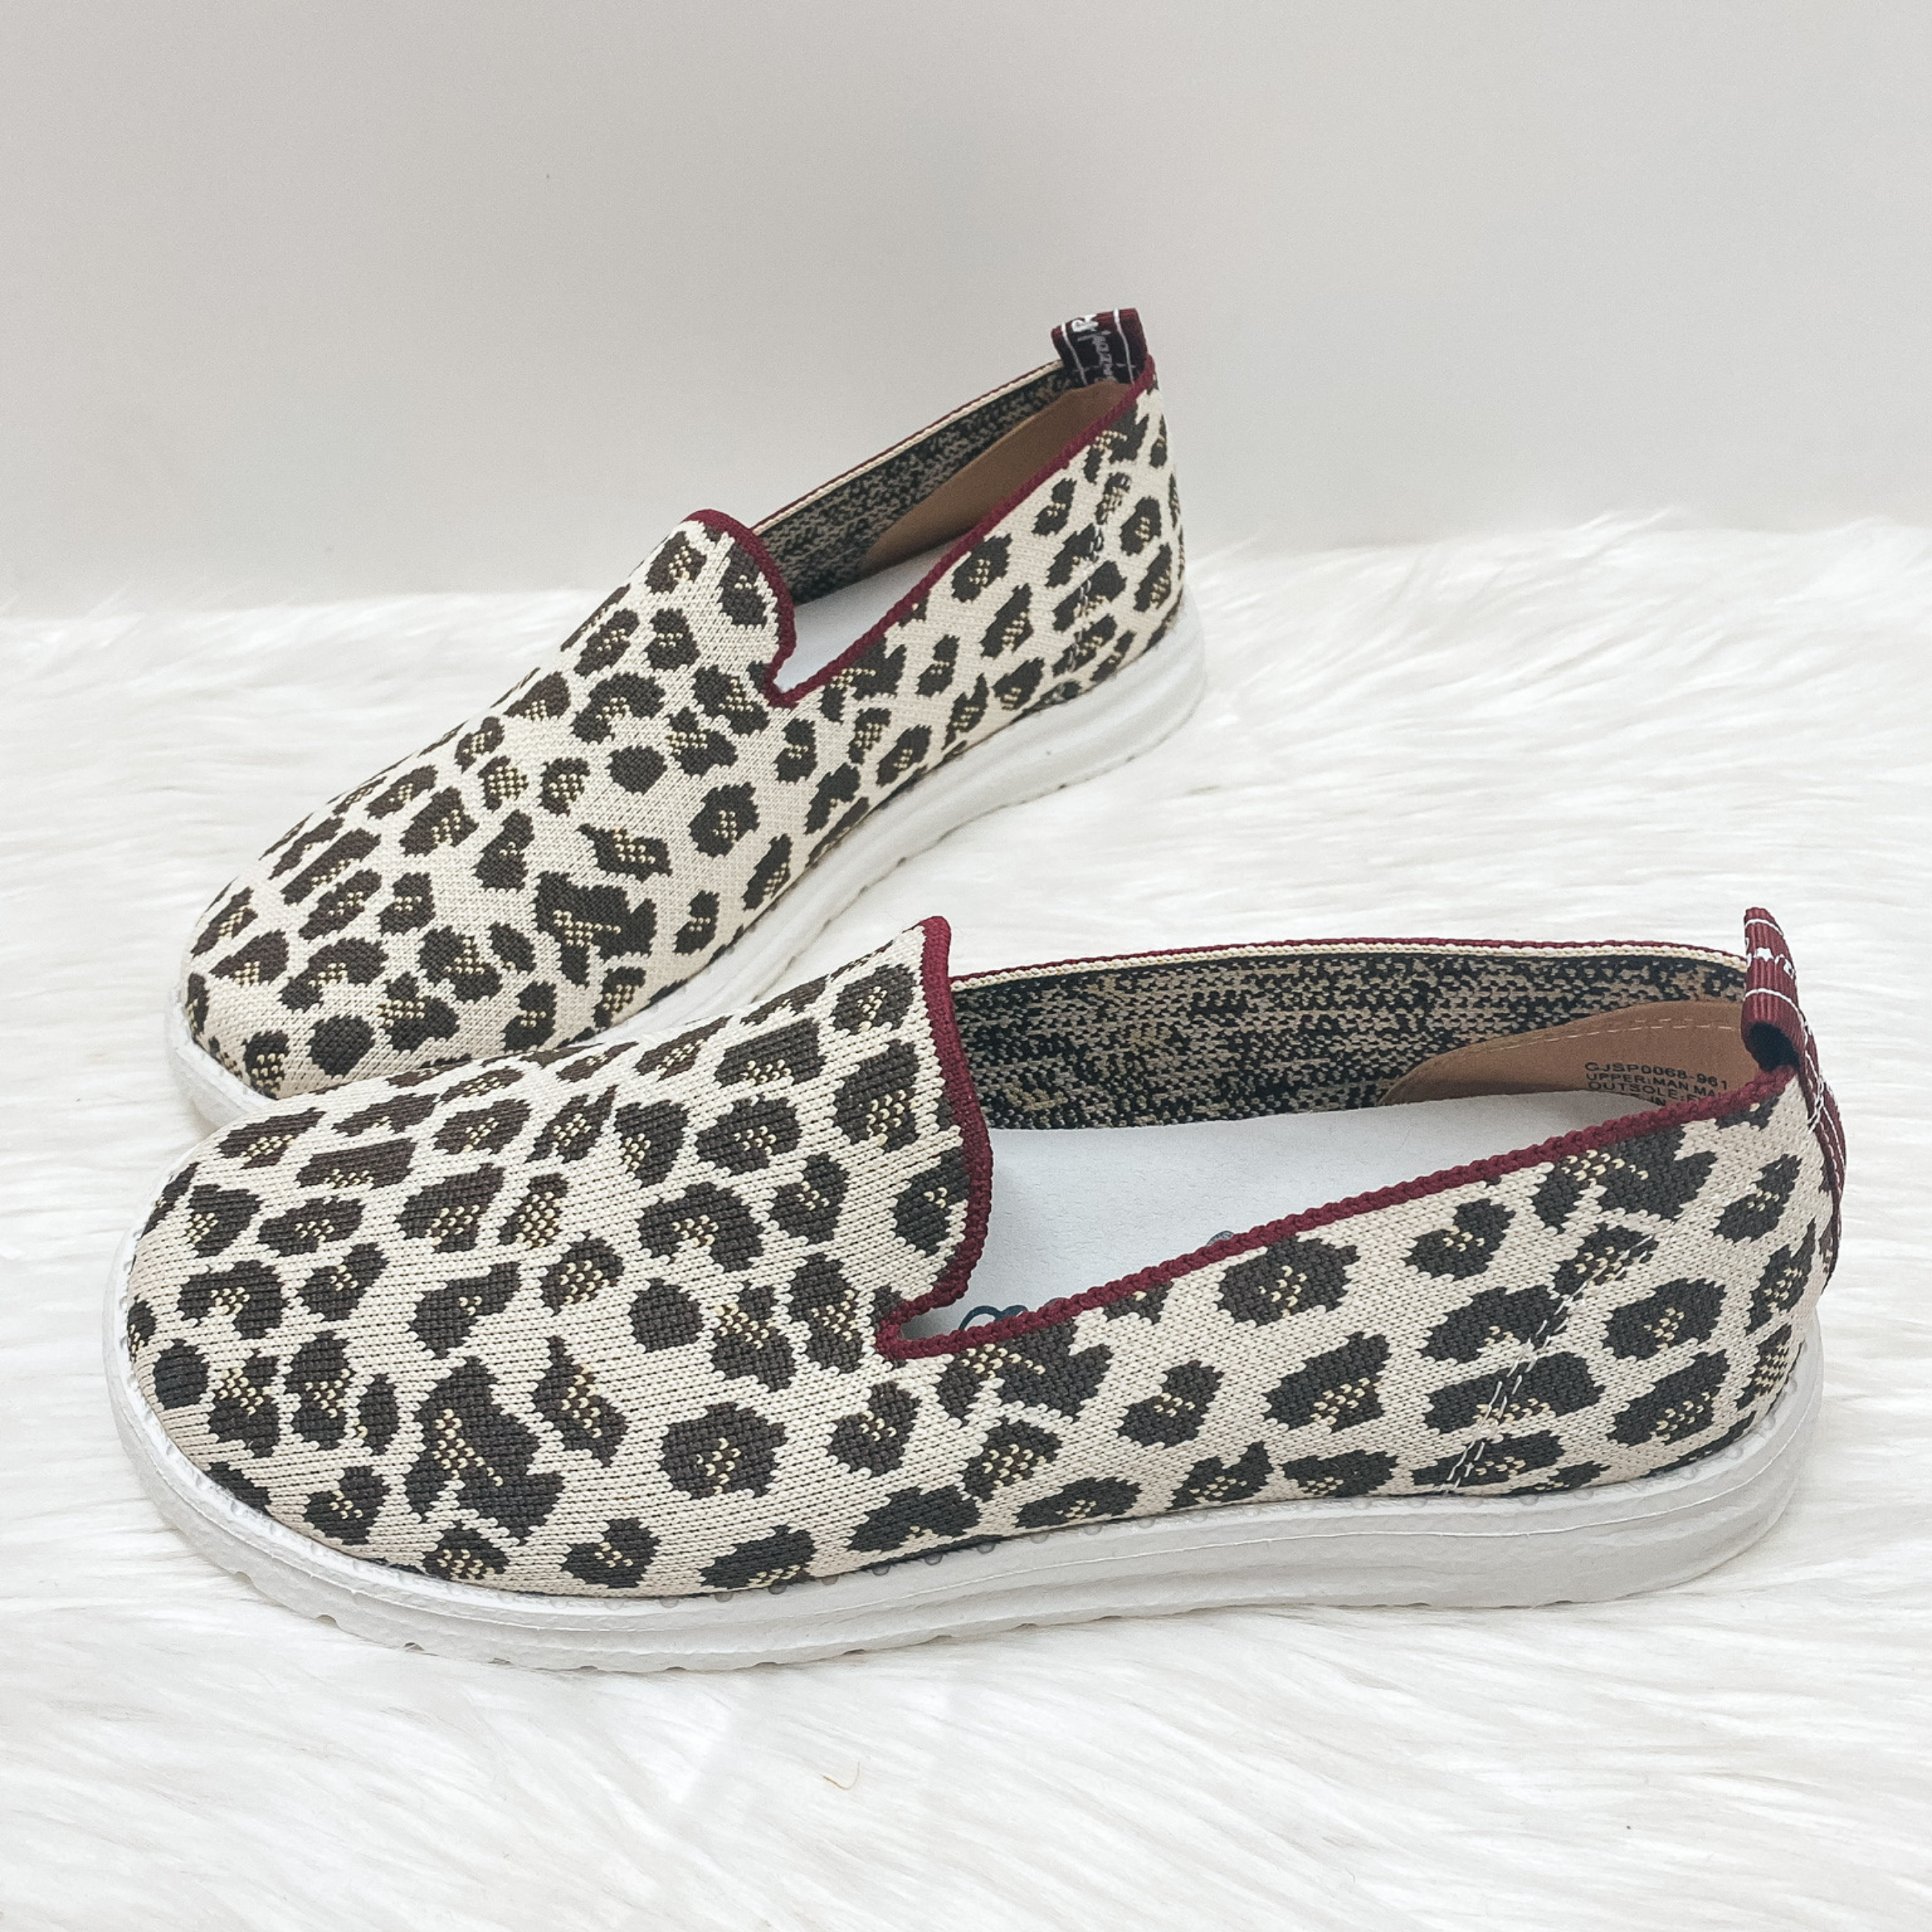 Very G | Sporting Style Knit Slip On Sneakers in Ivory Leopard - Giddy Up Glamour Boutique